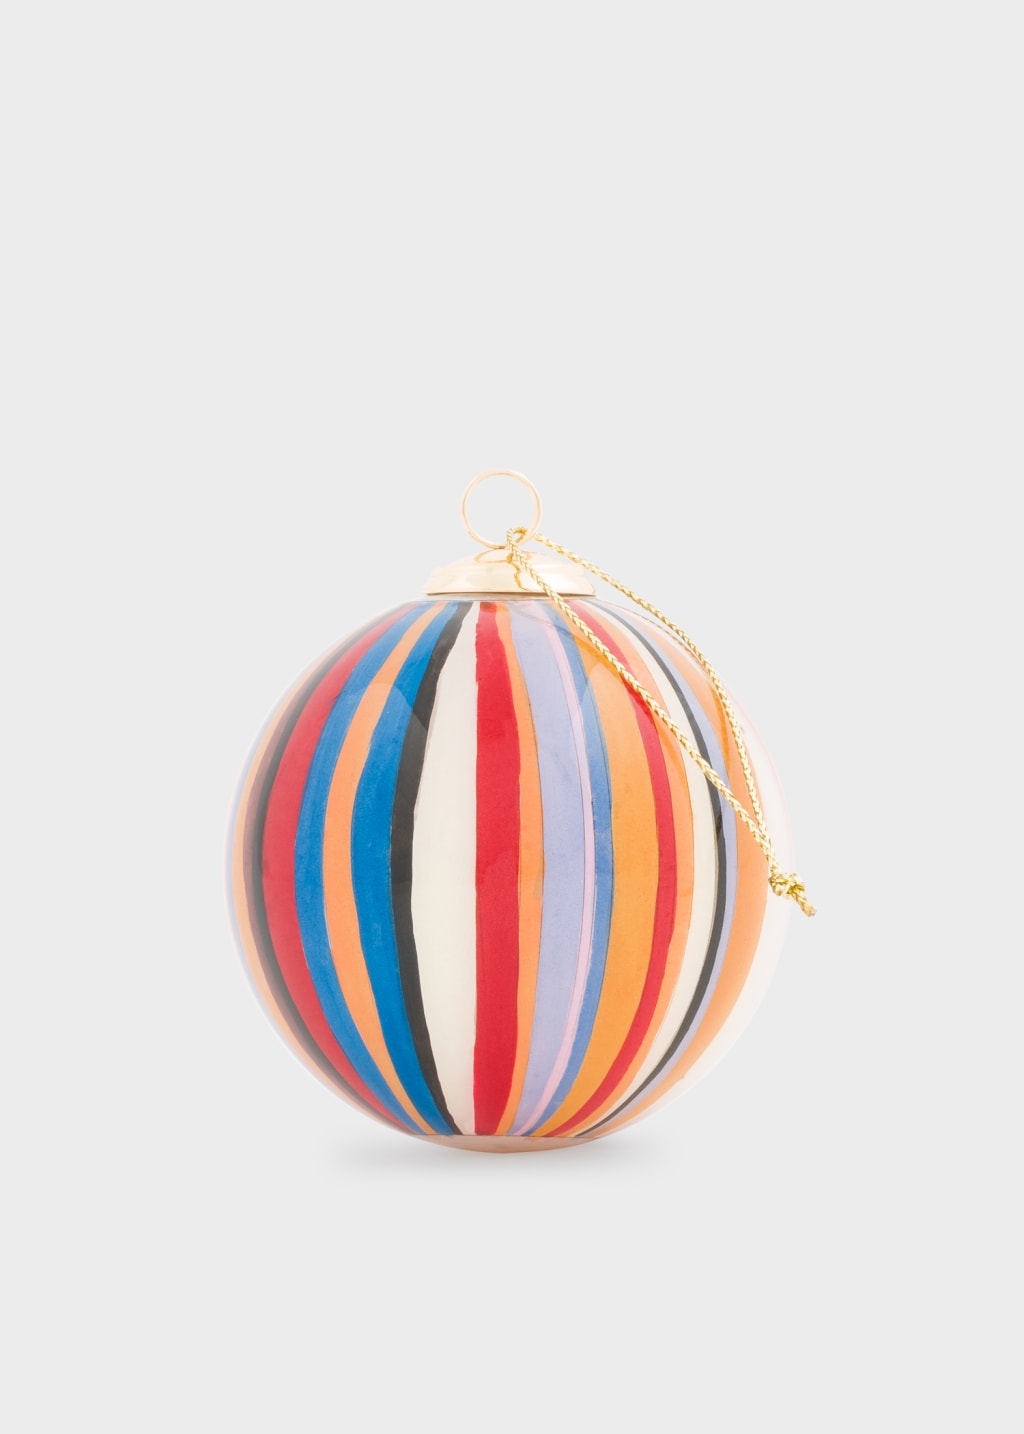 Front View - Hand-Painted 'Signature Stripe' Glass Bauble Paul Smith